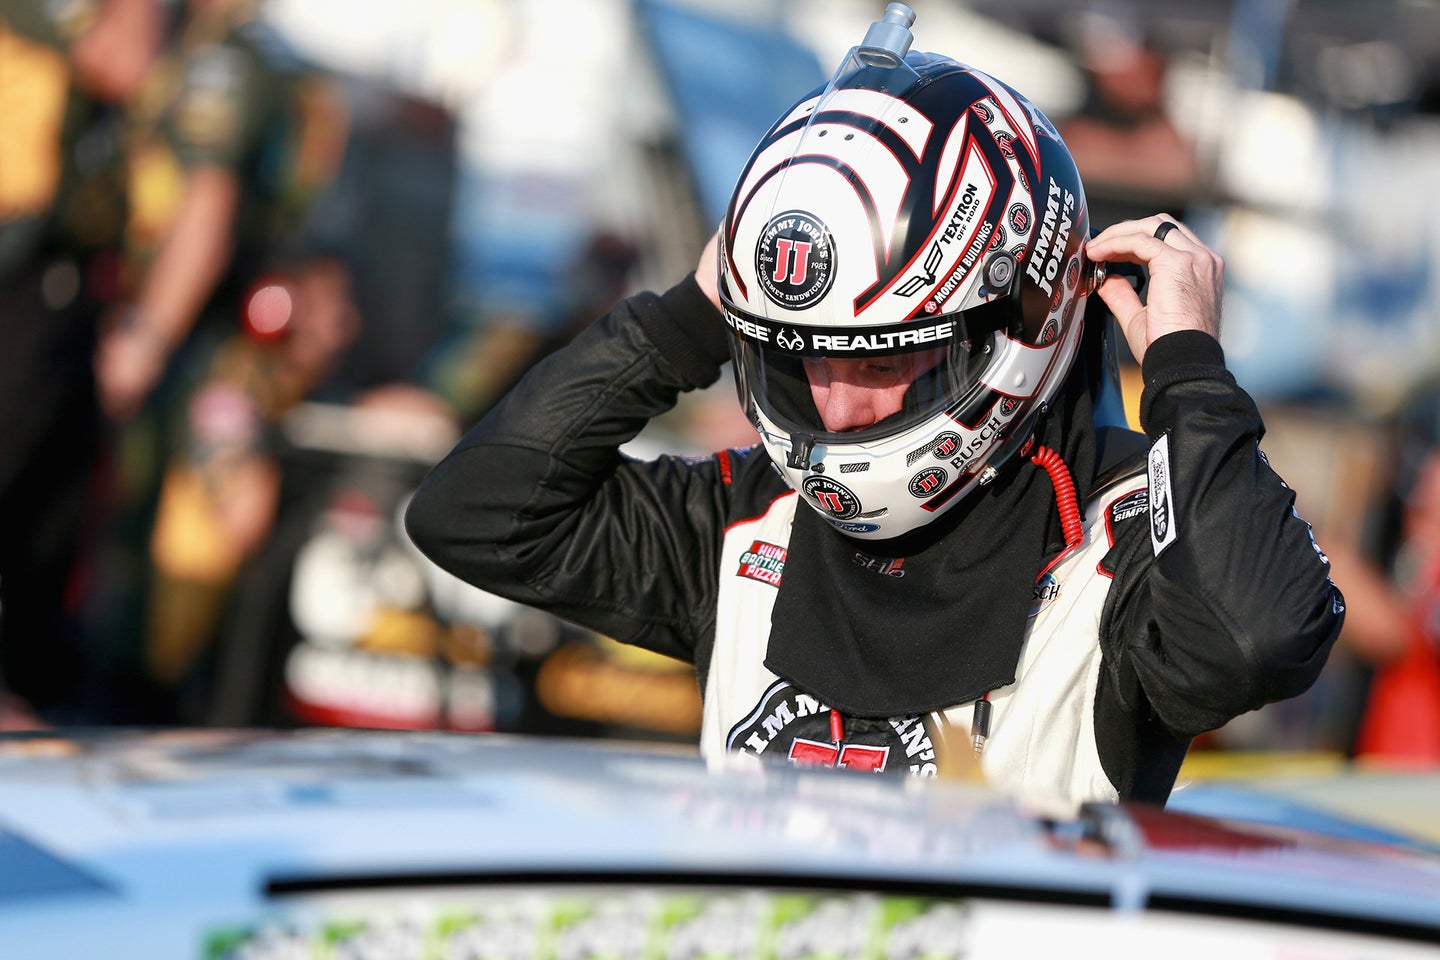 Preview: Kevin Harvick on Pole for NASCAR Cup Series Playoff Race at Richmond Raceway